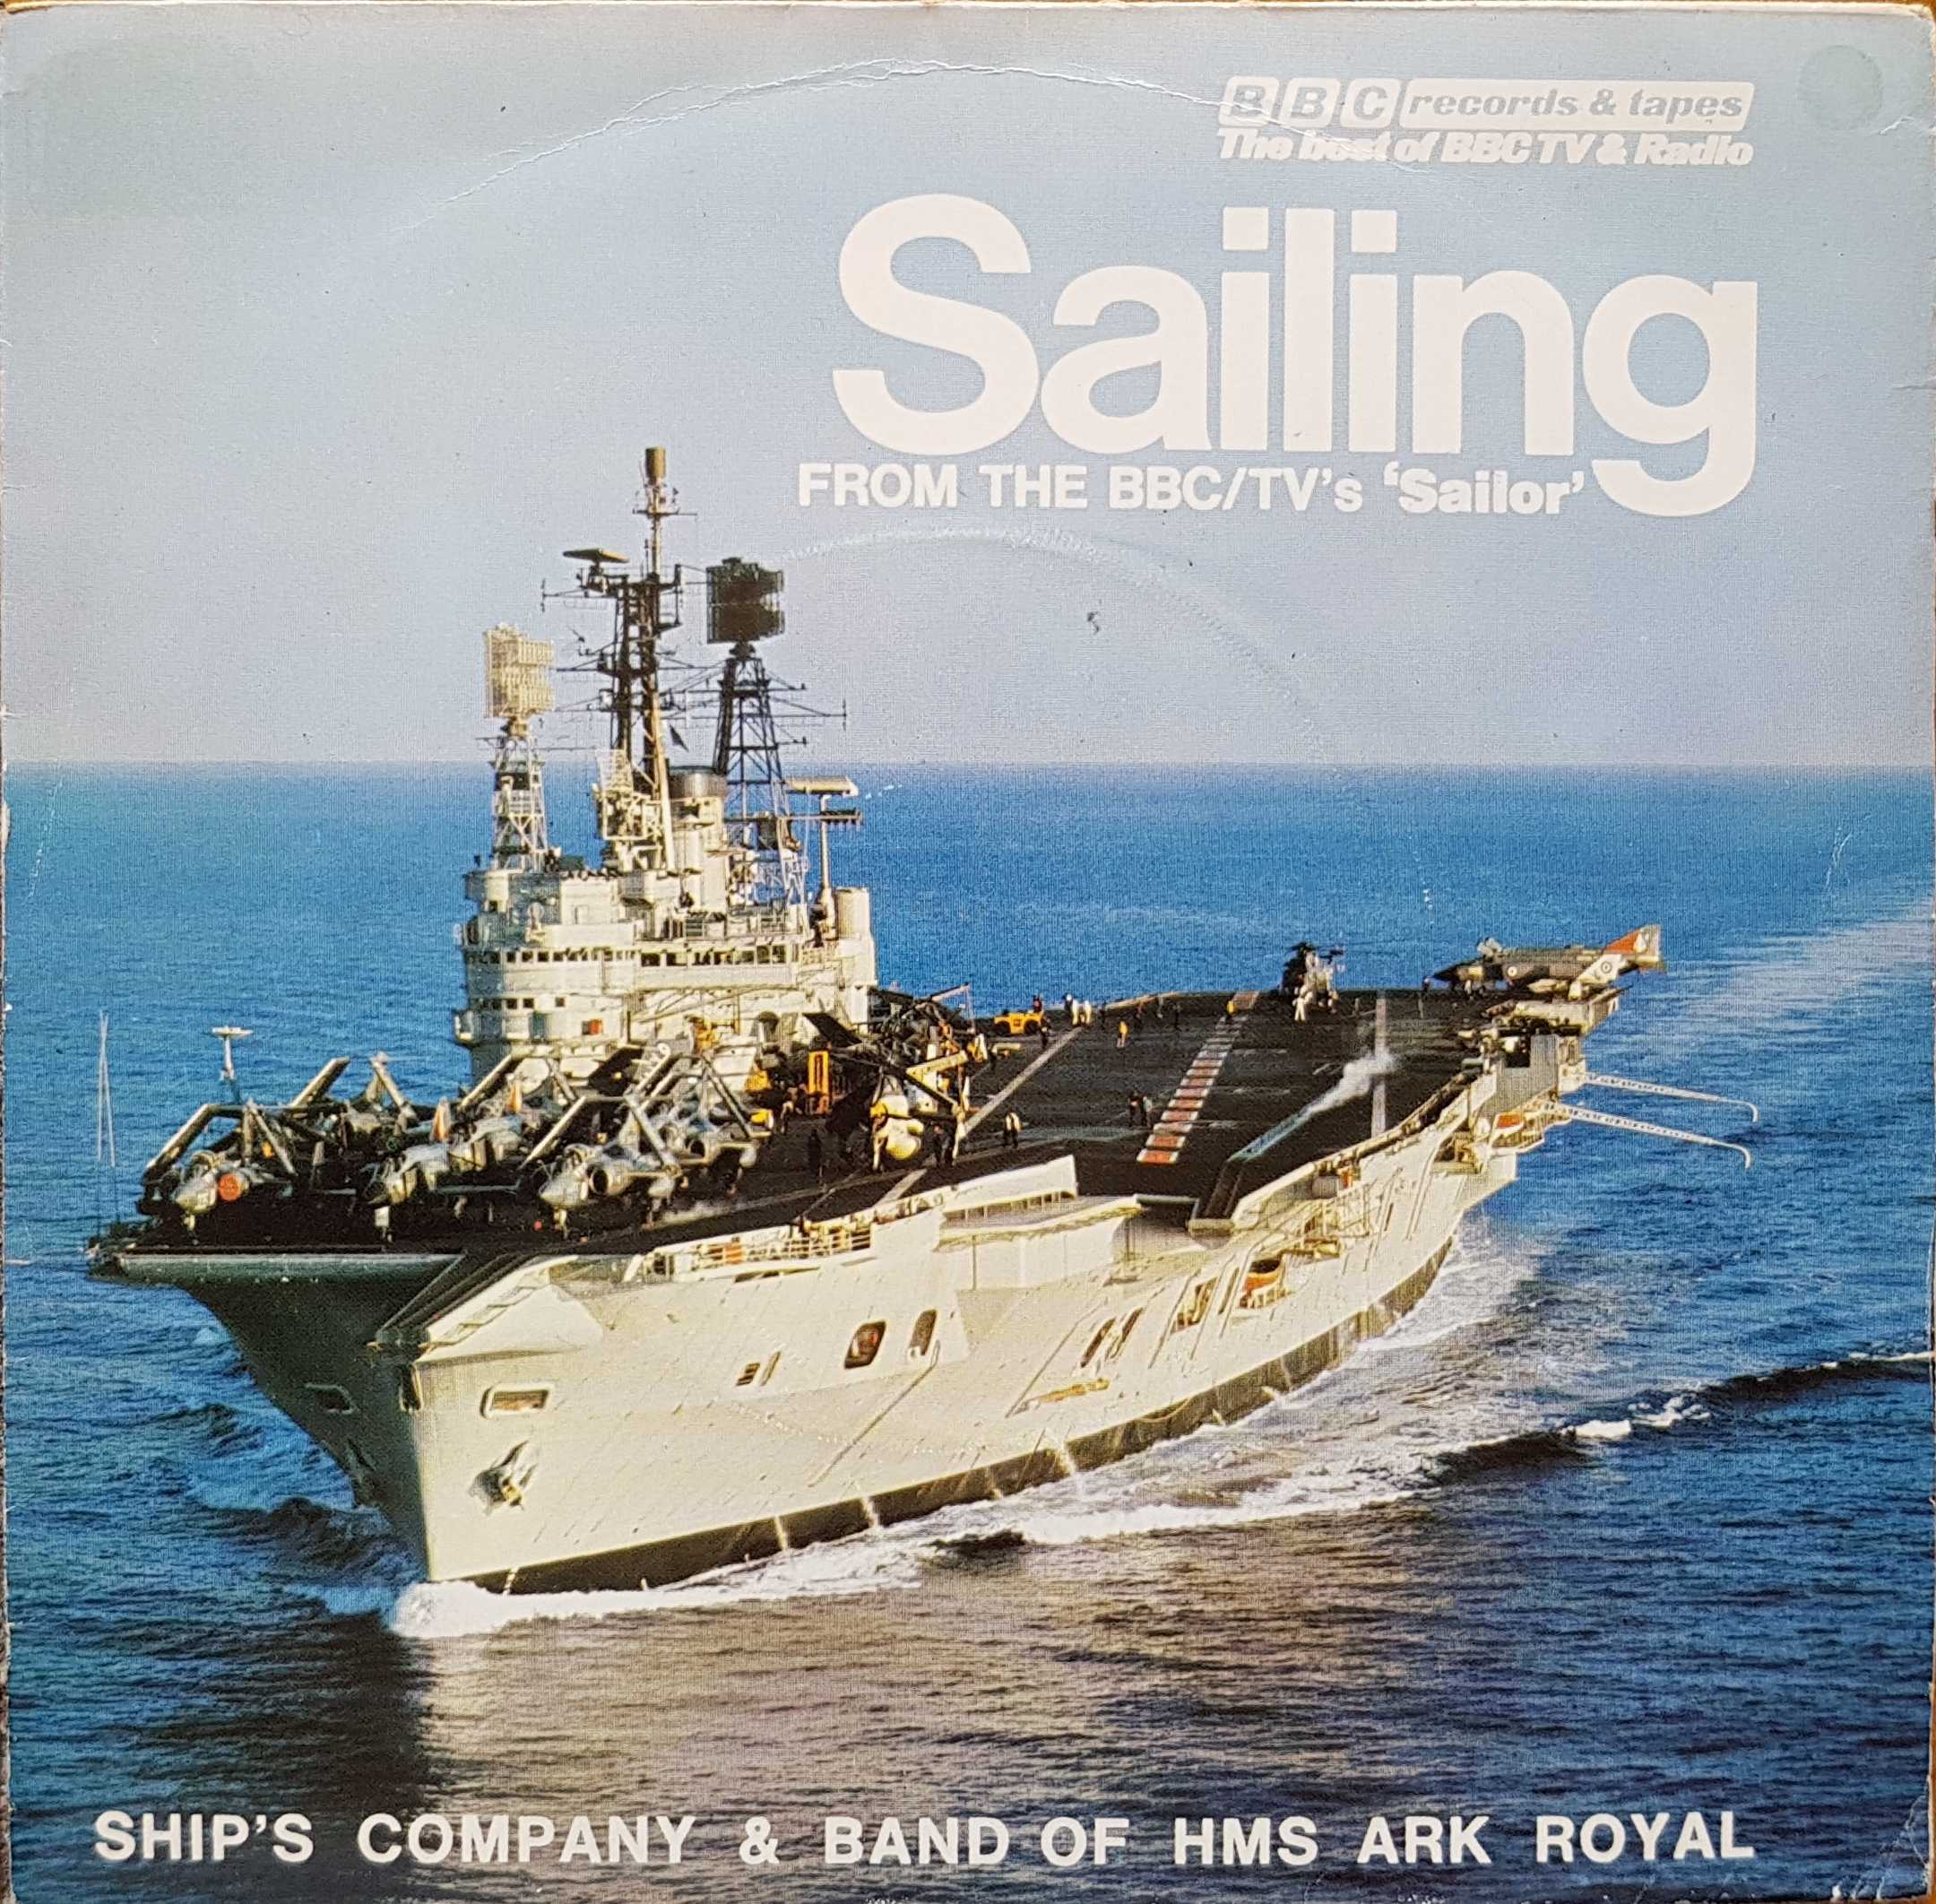 Picture of RESL 38 Sailing by artist Sutherland / Mike Batt from the BBC records and Tapes library